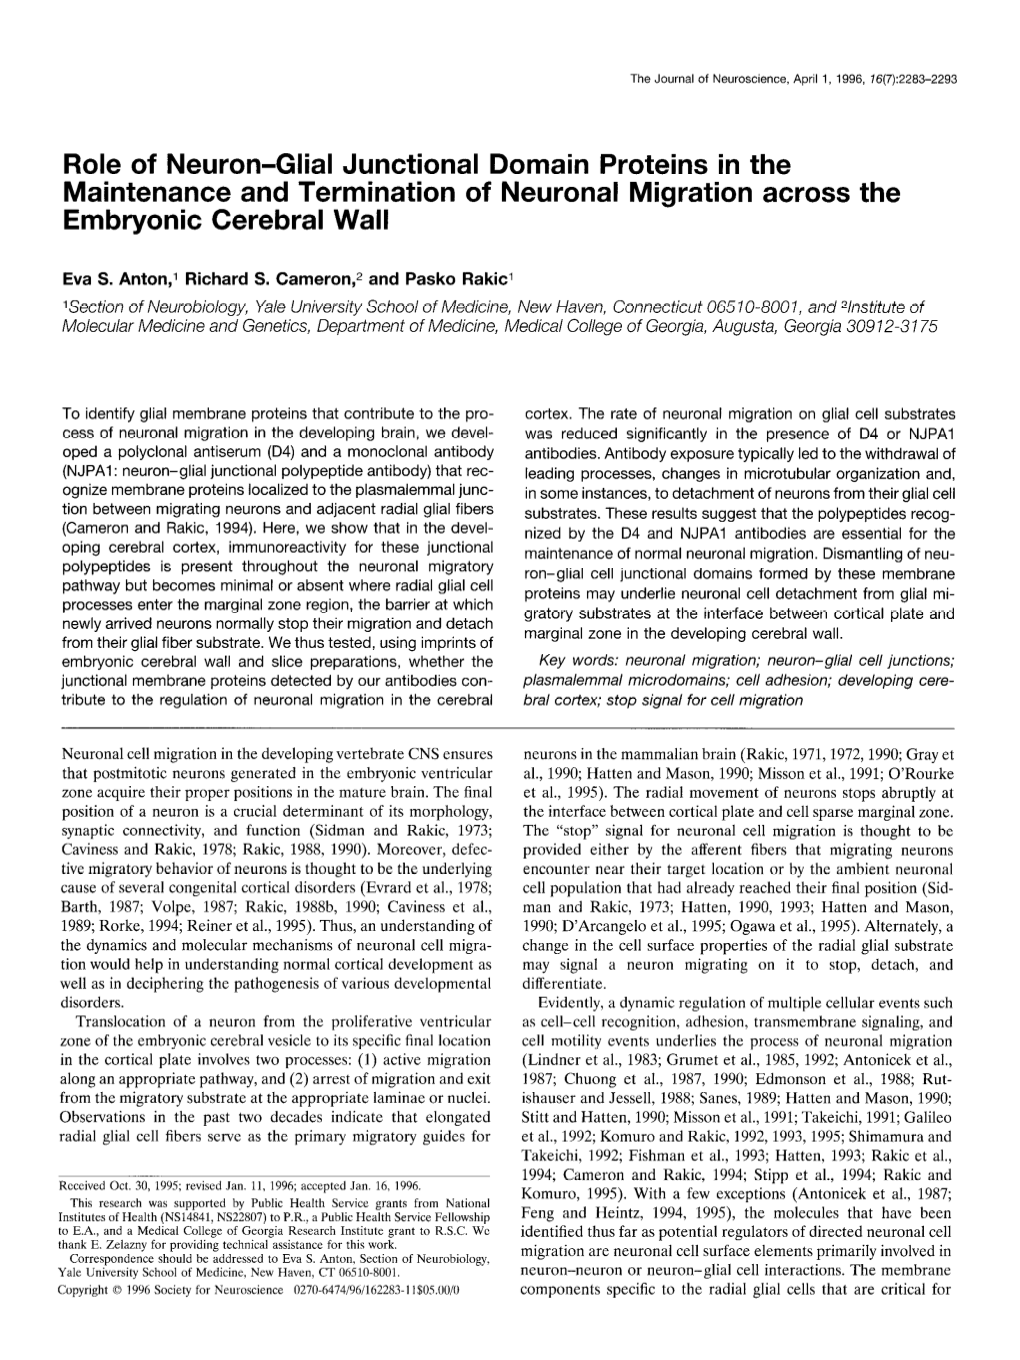 Role of Neuron-Glial Junctional Domain Proteins in the Maintenance and Termination of Neuronal Migration Across the Embryonic Cerebral Wall